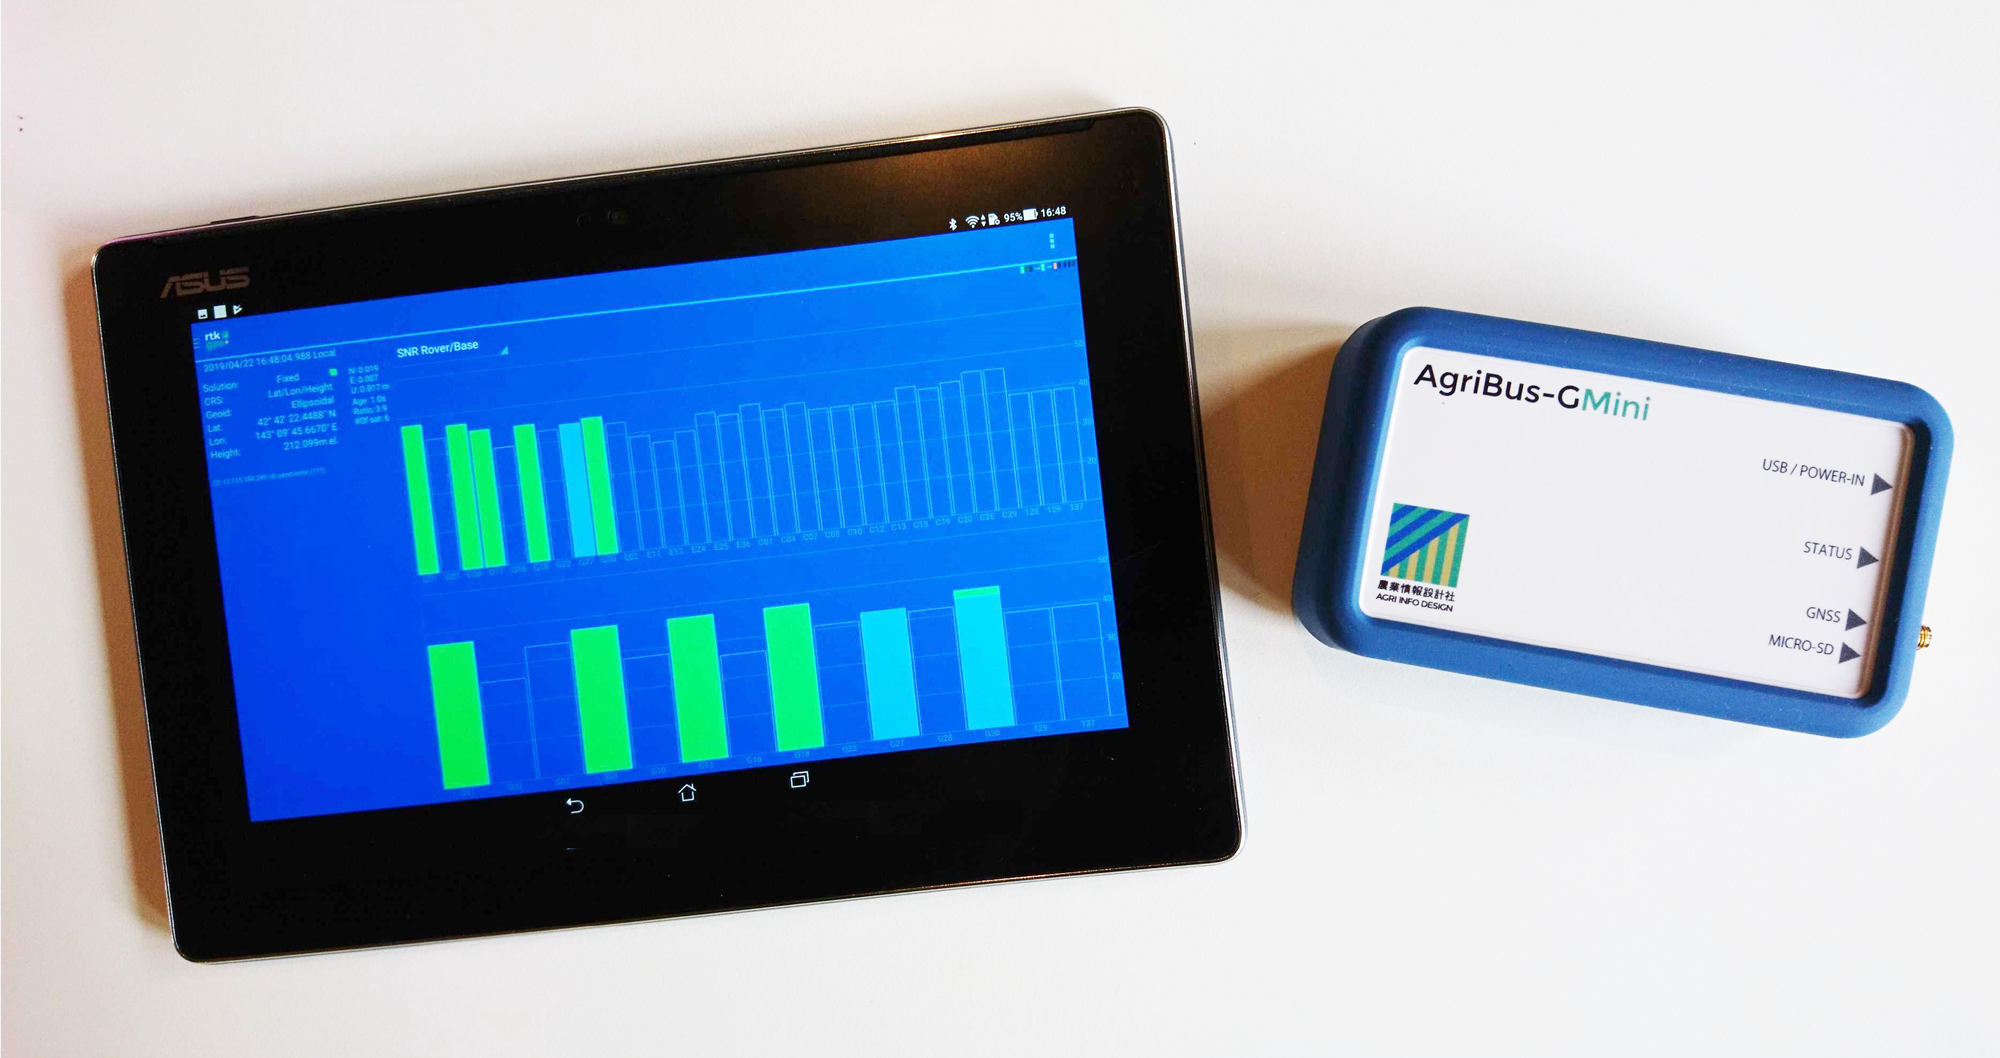 Notice of RTKGPS+for AgriBus-GMini application releases